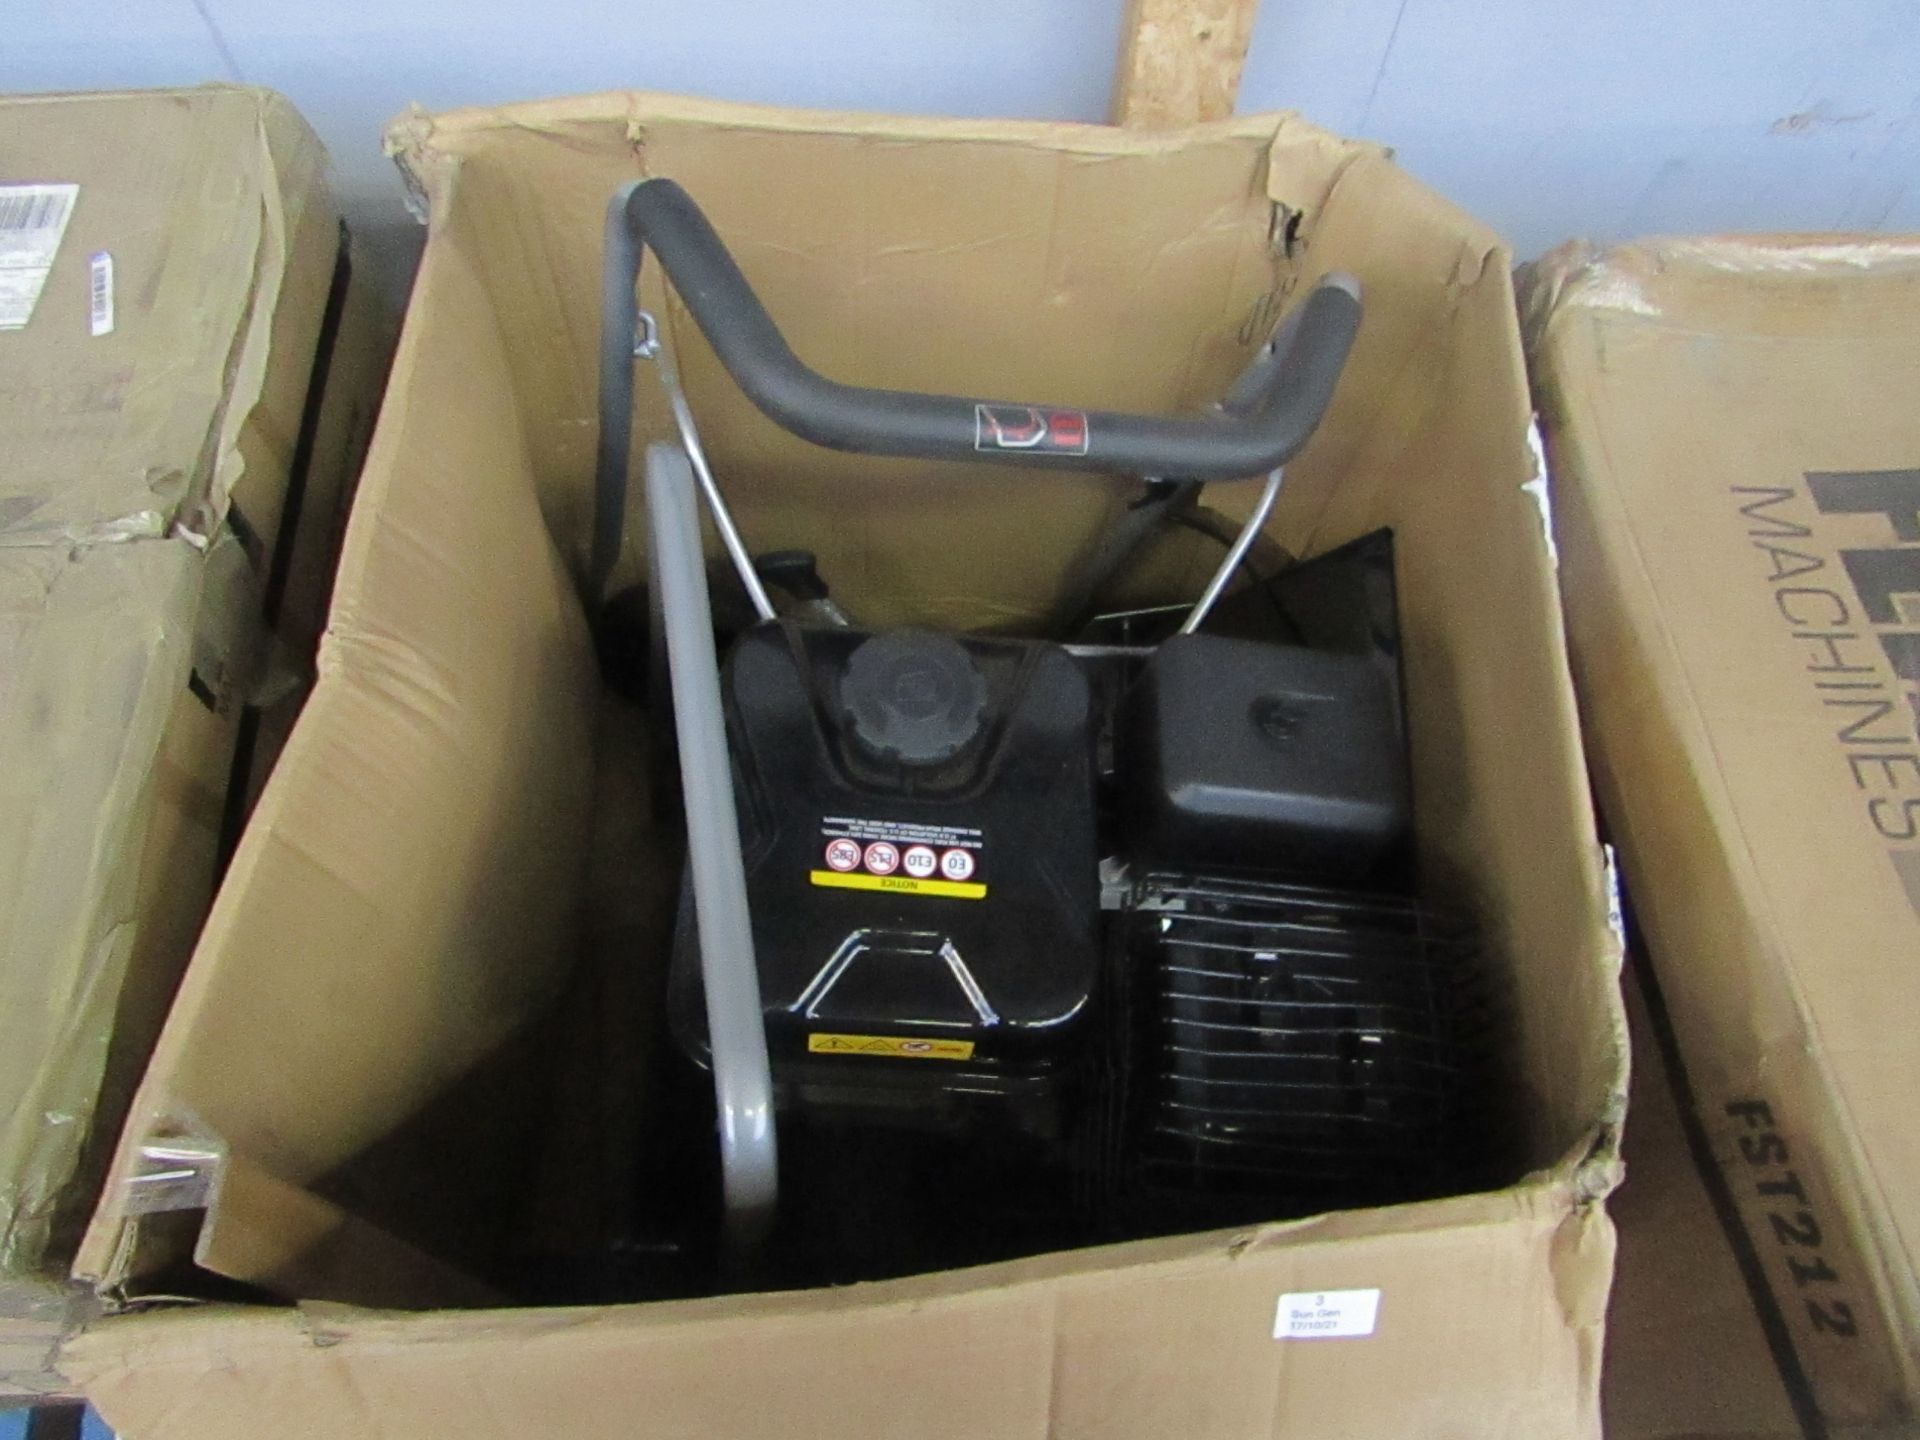 1x Feider FST212 Petrol Lawn scarifier - unchecked & boxed ( box is damaged ) - If unsure please